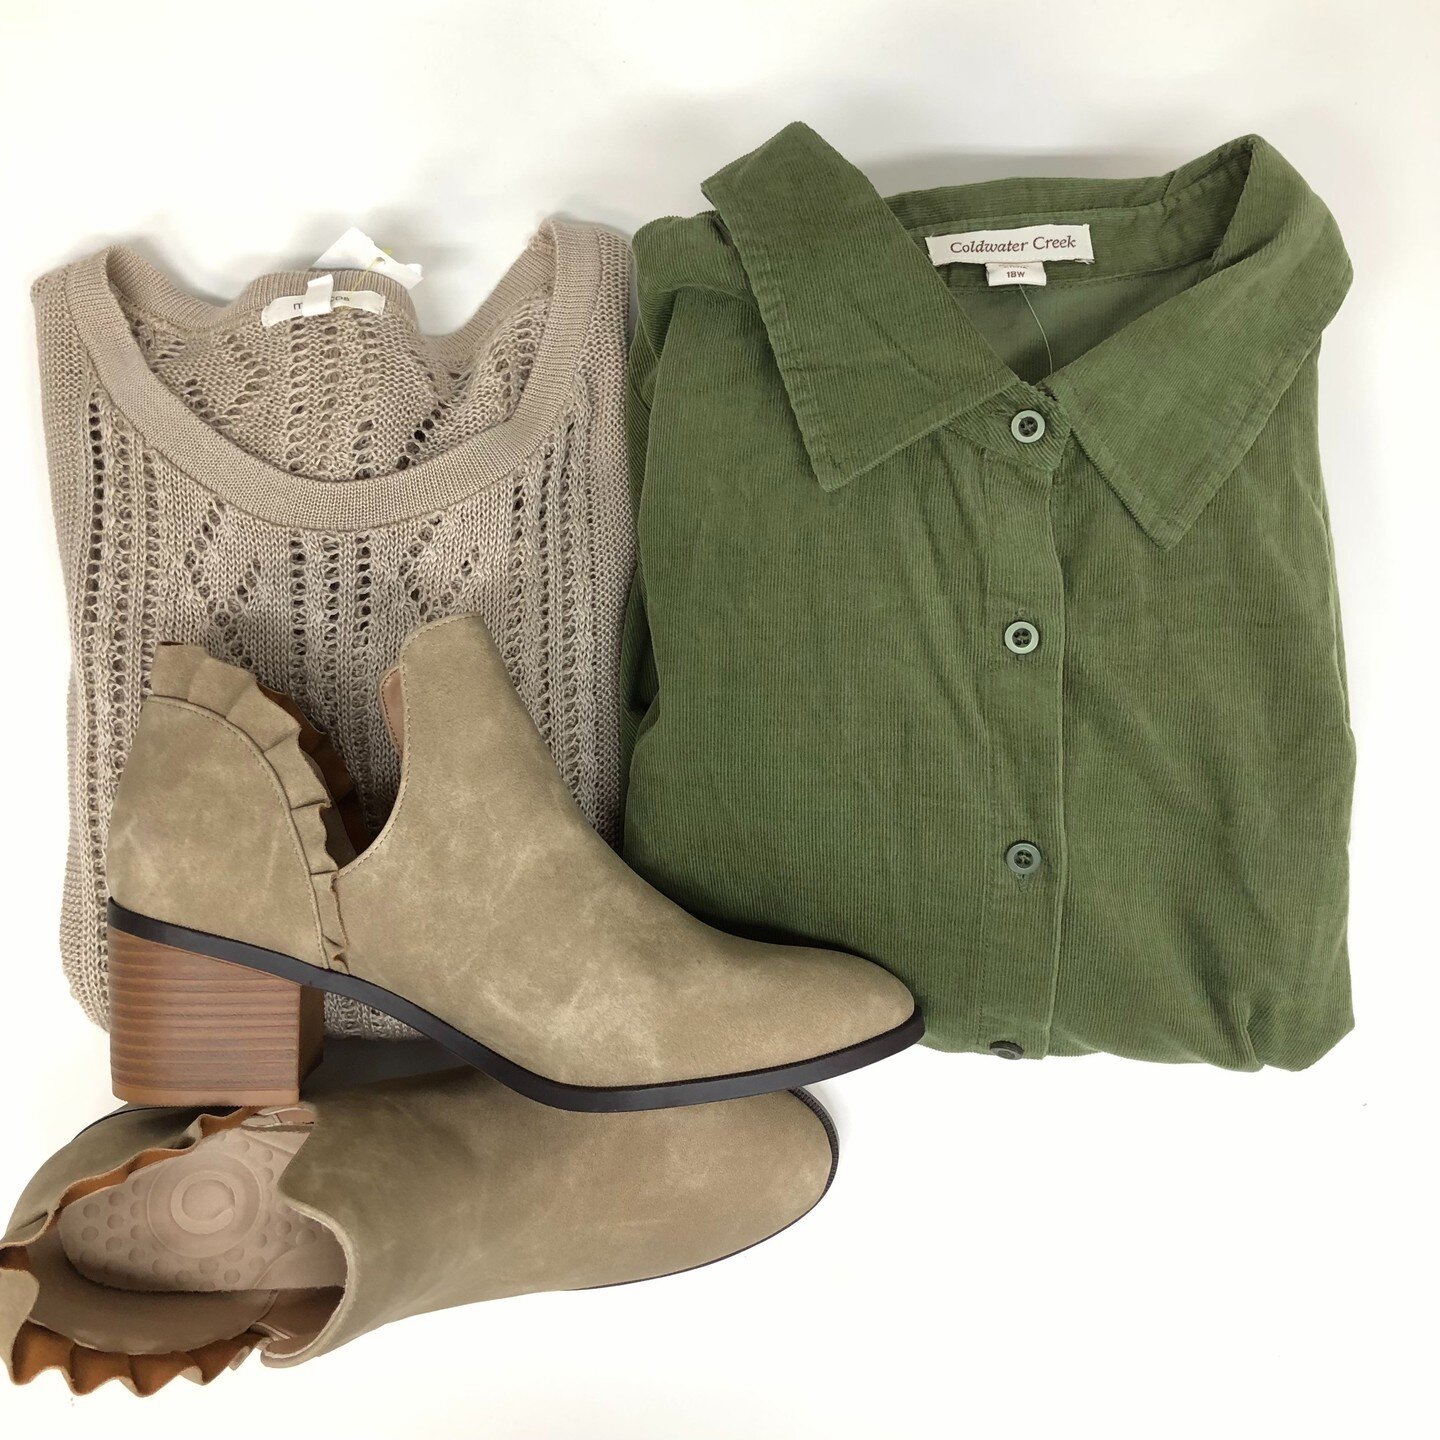 Cozy corduroy dresses make for perfect fall layering!